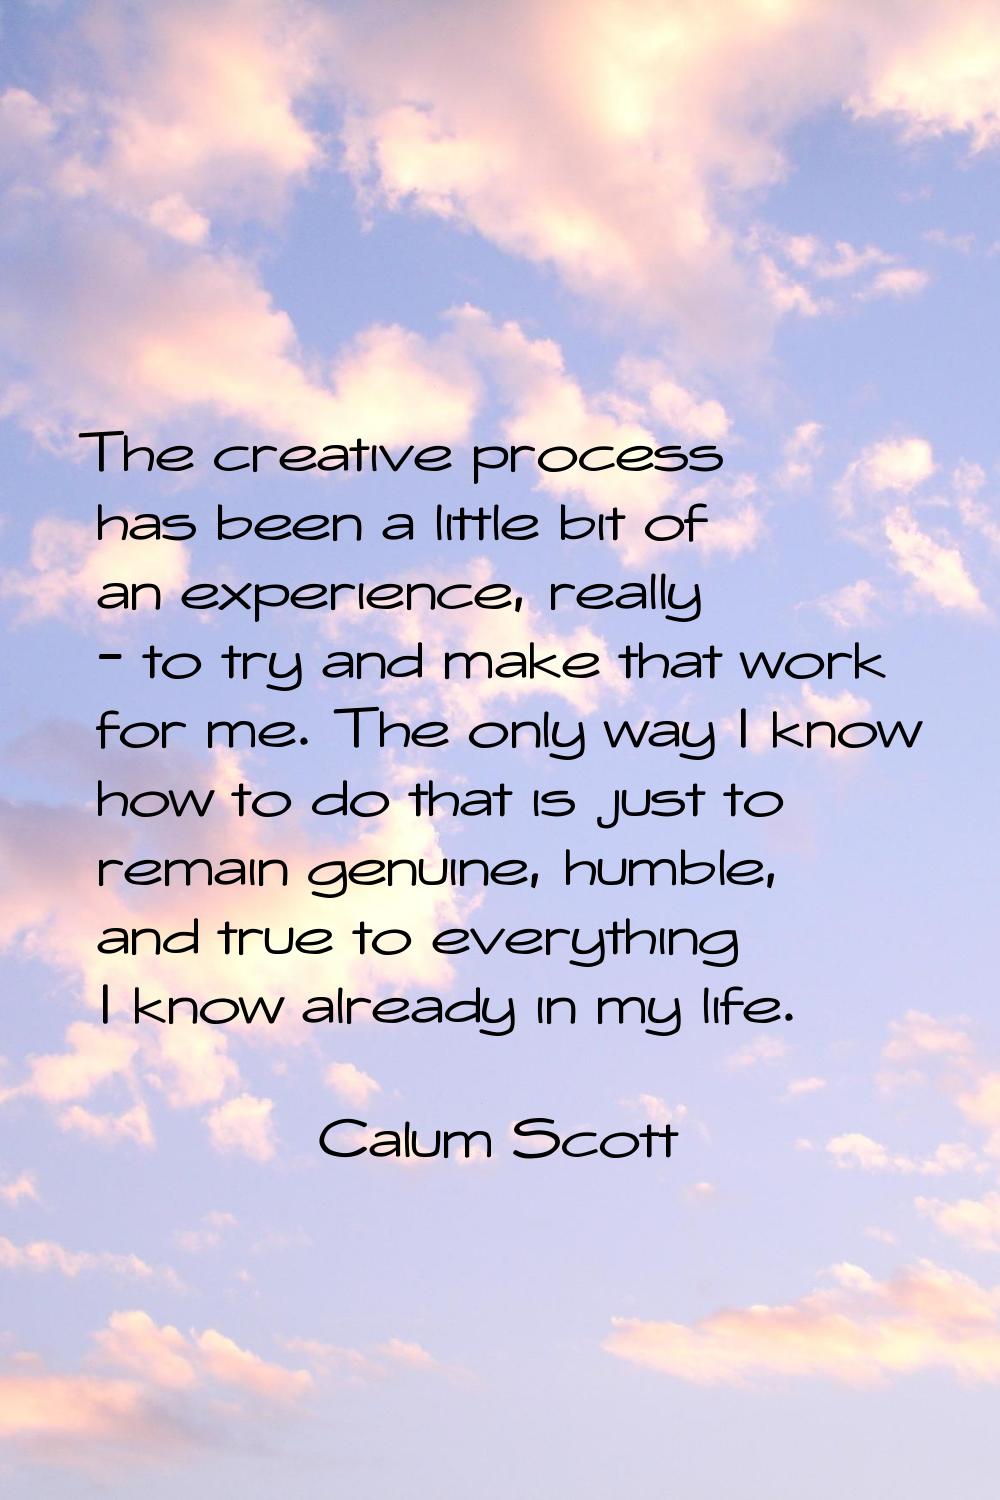 The creative process has been a little bit of an experience, really - to try and make that work for